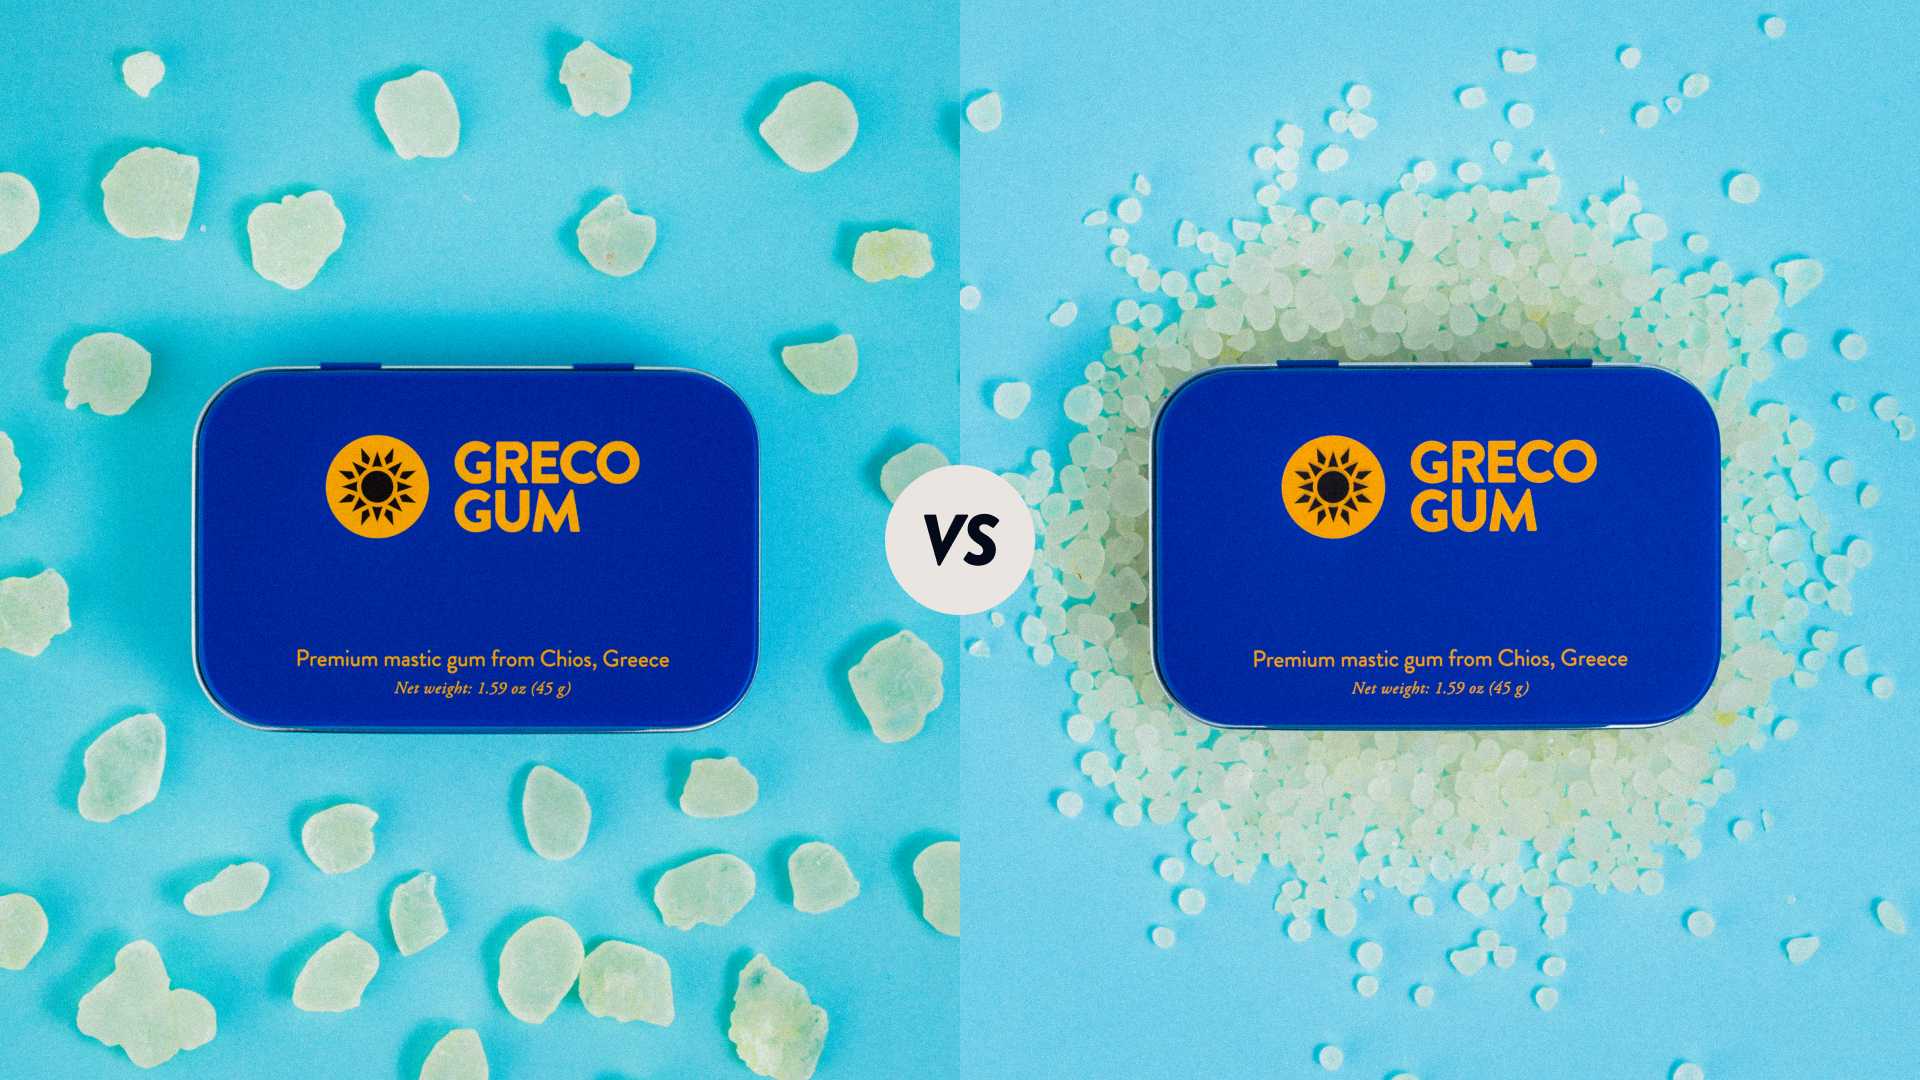 Greco Gum tins positioned next to each other, surrounded by either mastic gum droplets or mastic gum nuggets.